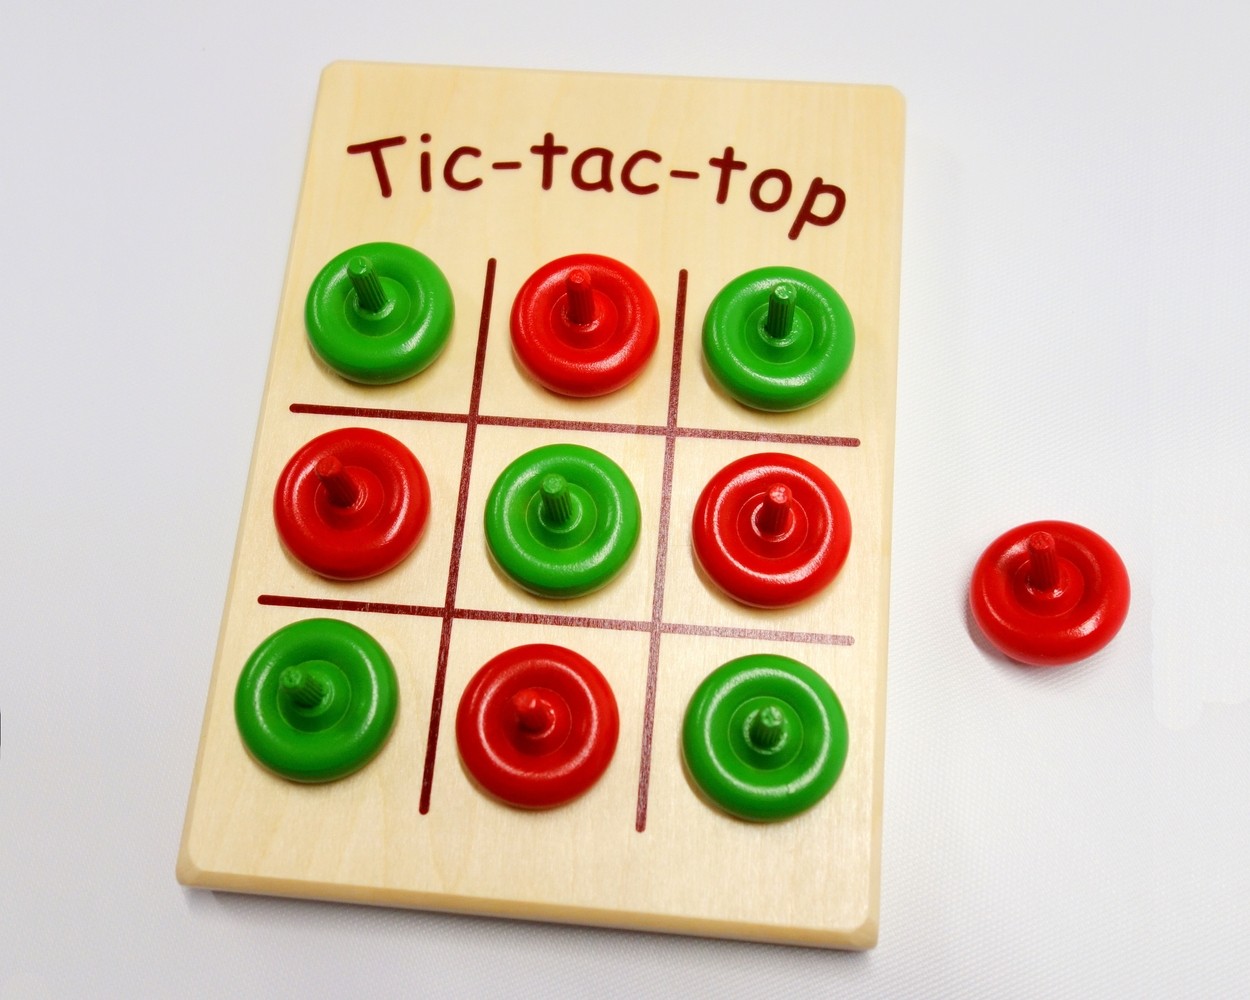 Tic-tac-top, 10 spinning tops